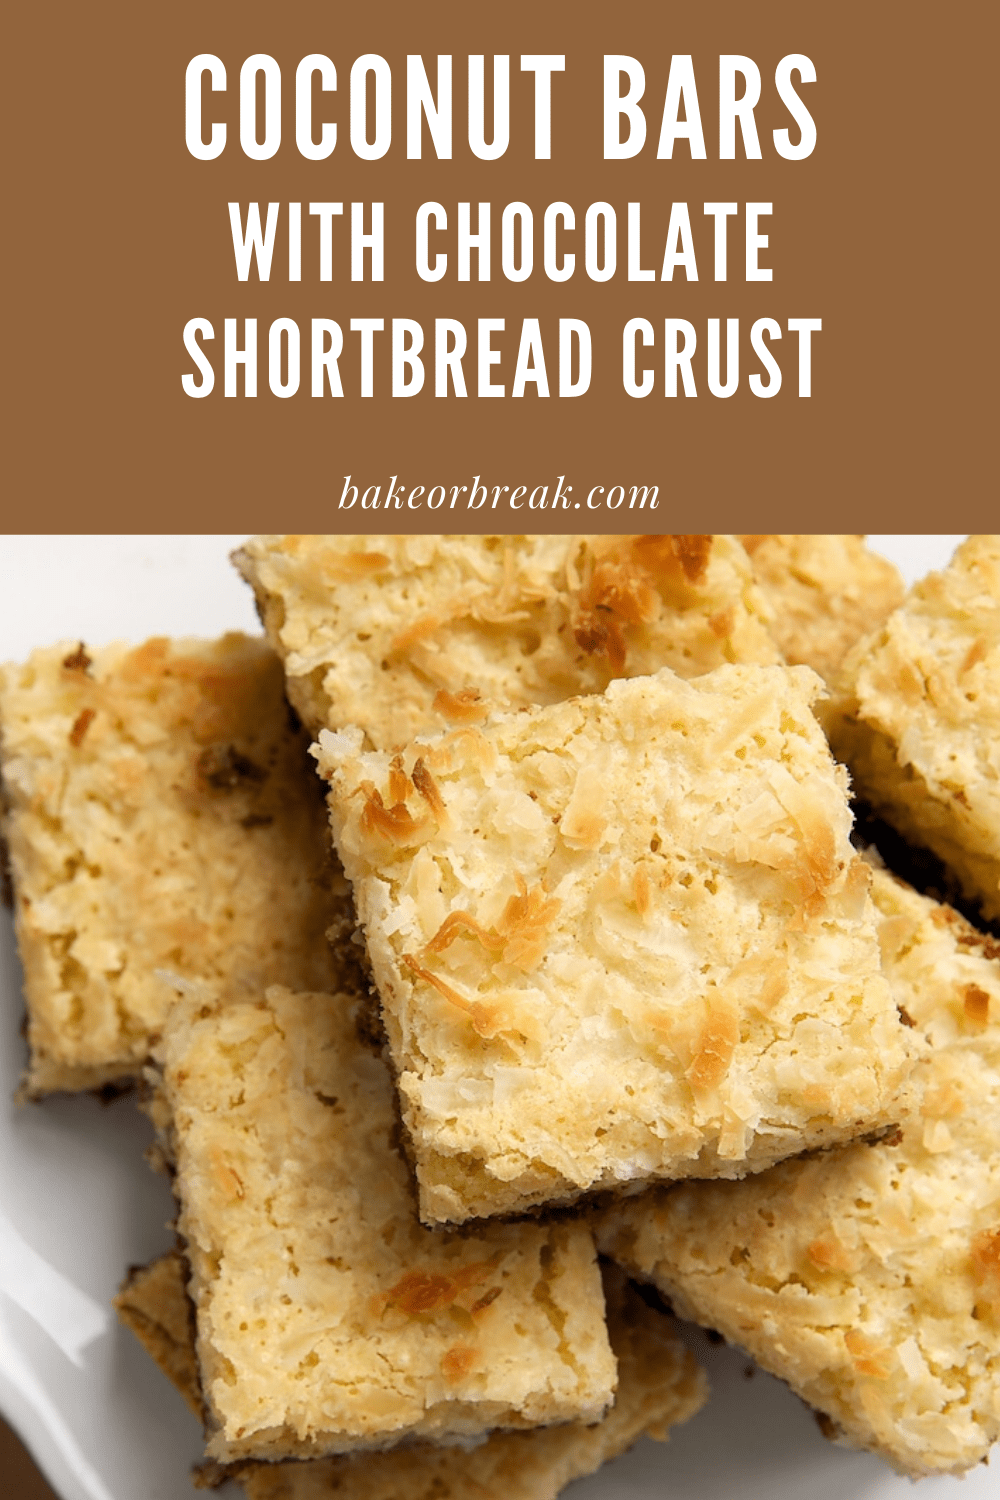 Coconut Bars with Chocolate Shortbread Crust